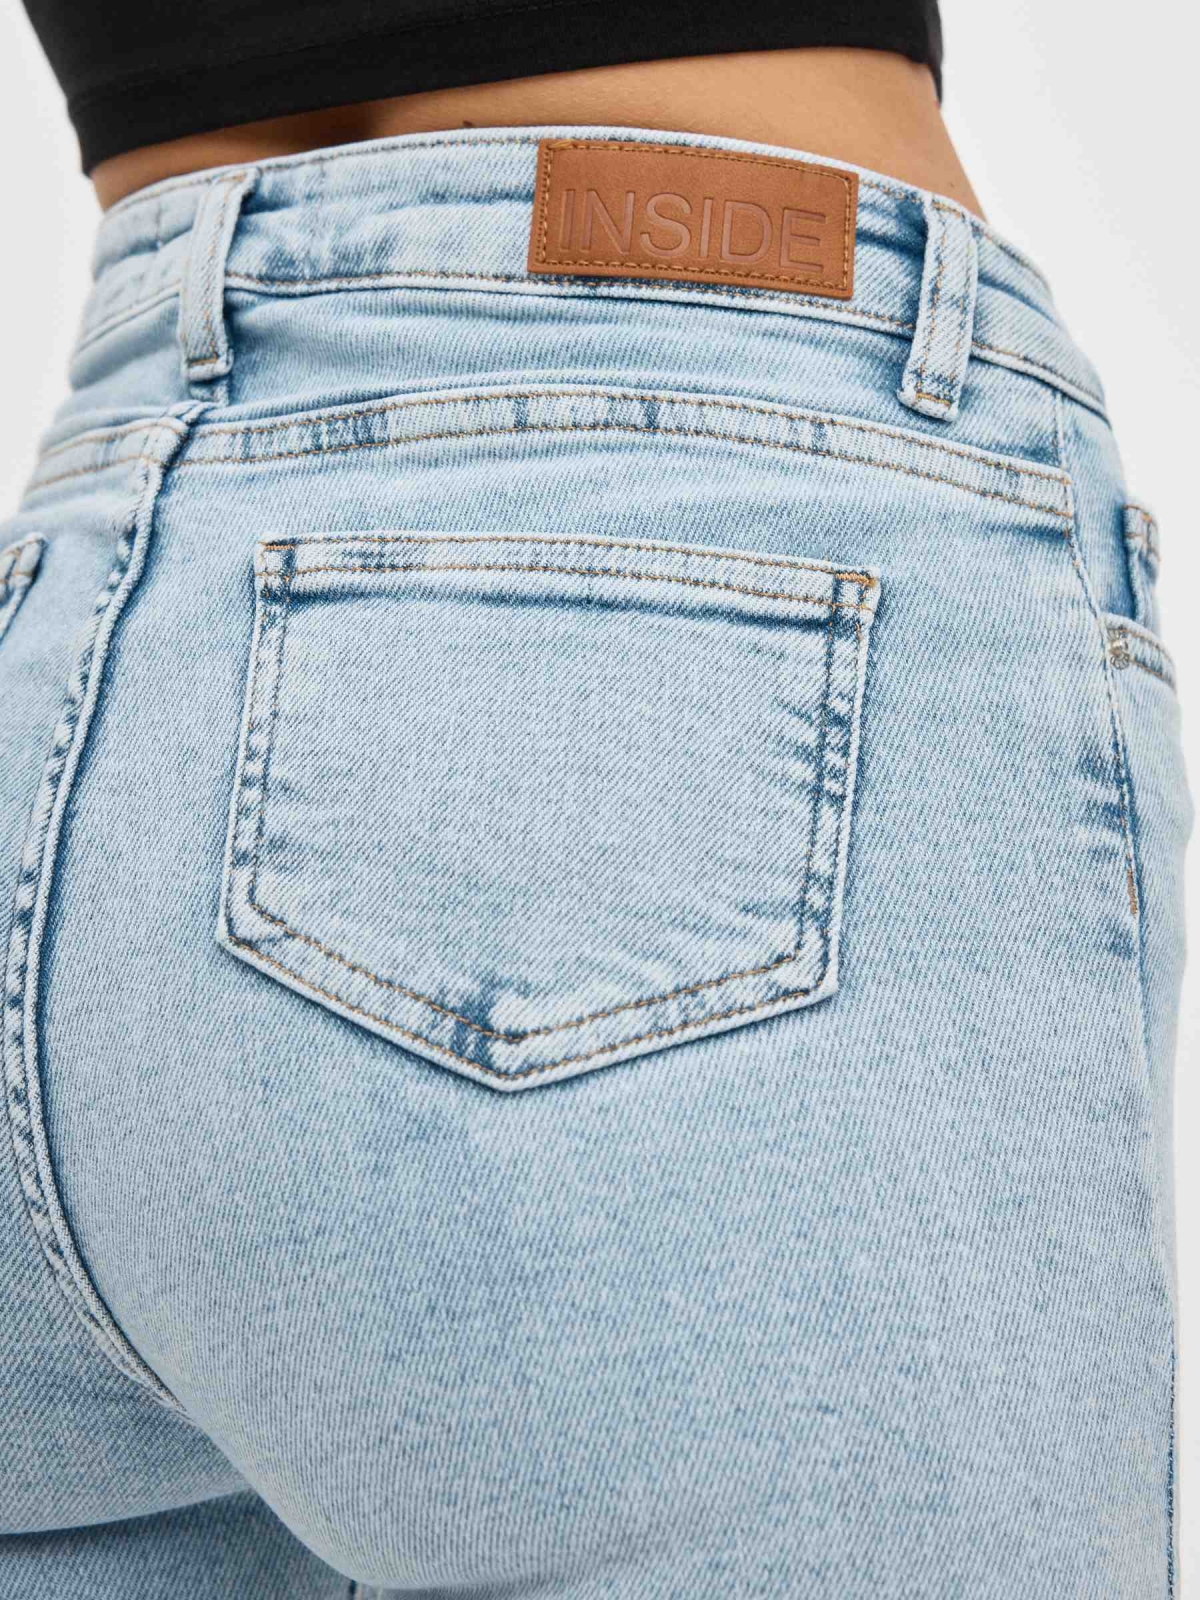 High rise skinny jeans light blue detail view